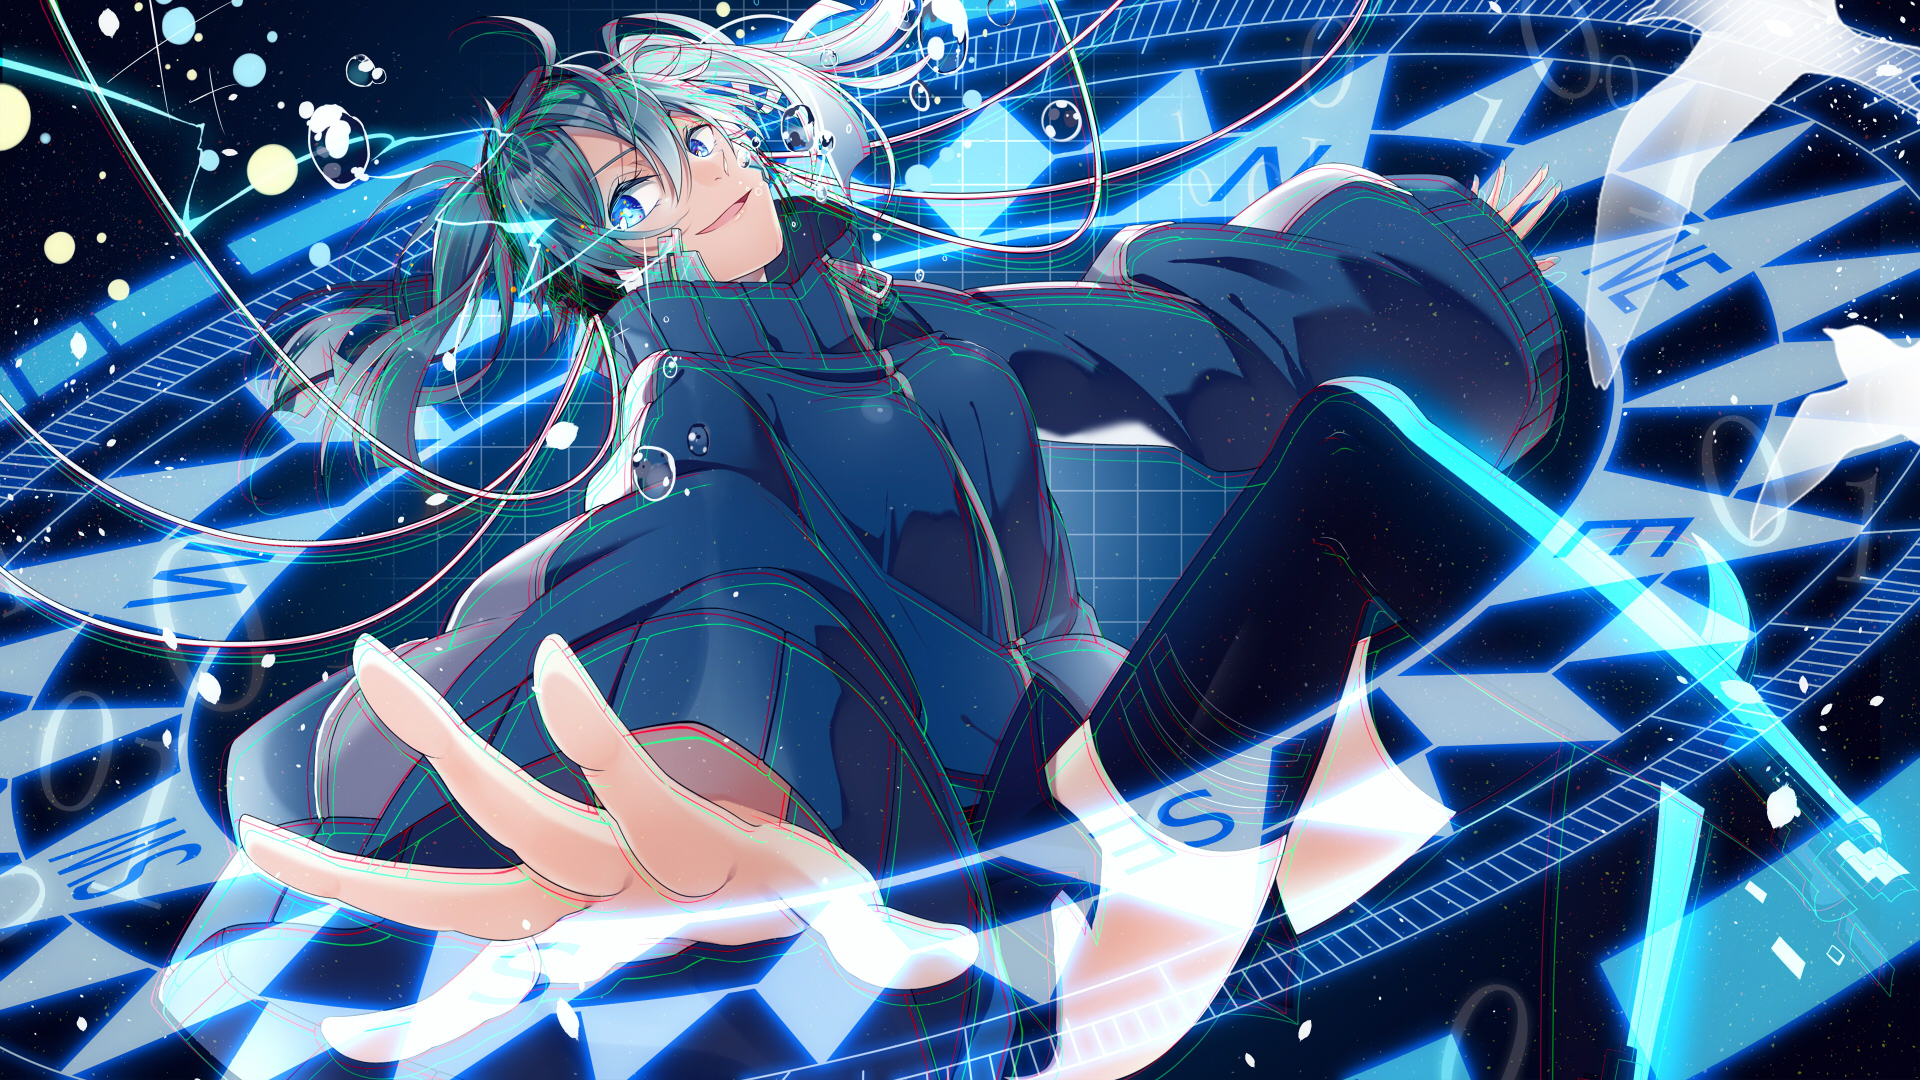 Anime Kagerou Project HD Wallpaper | Background Image